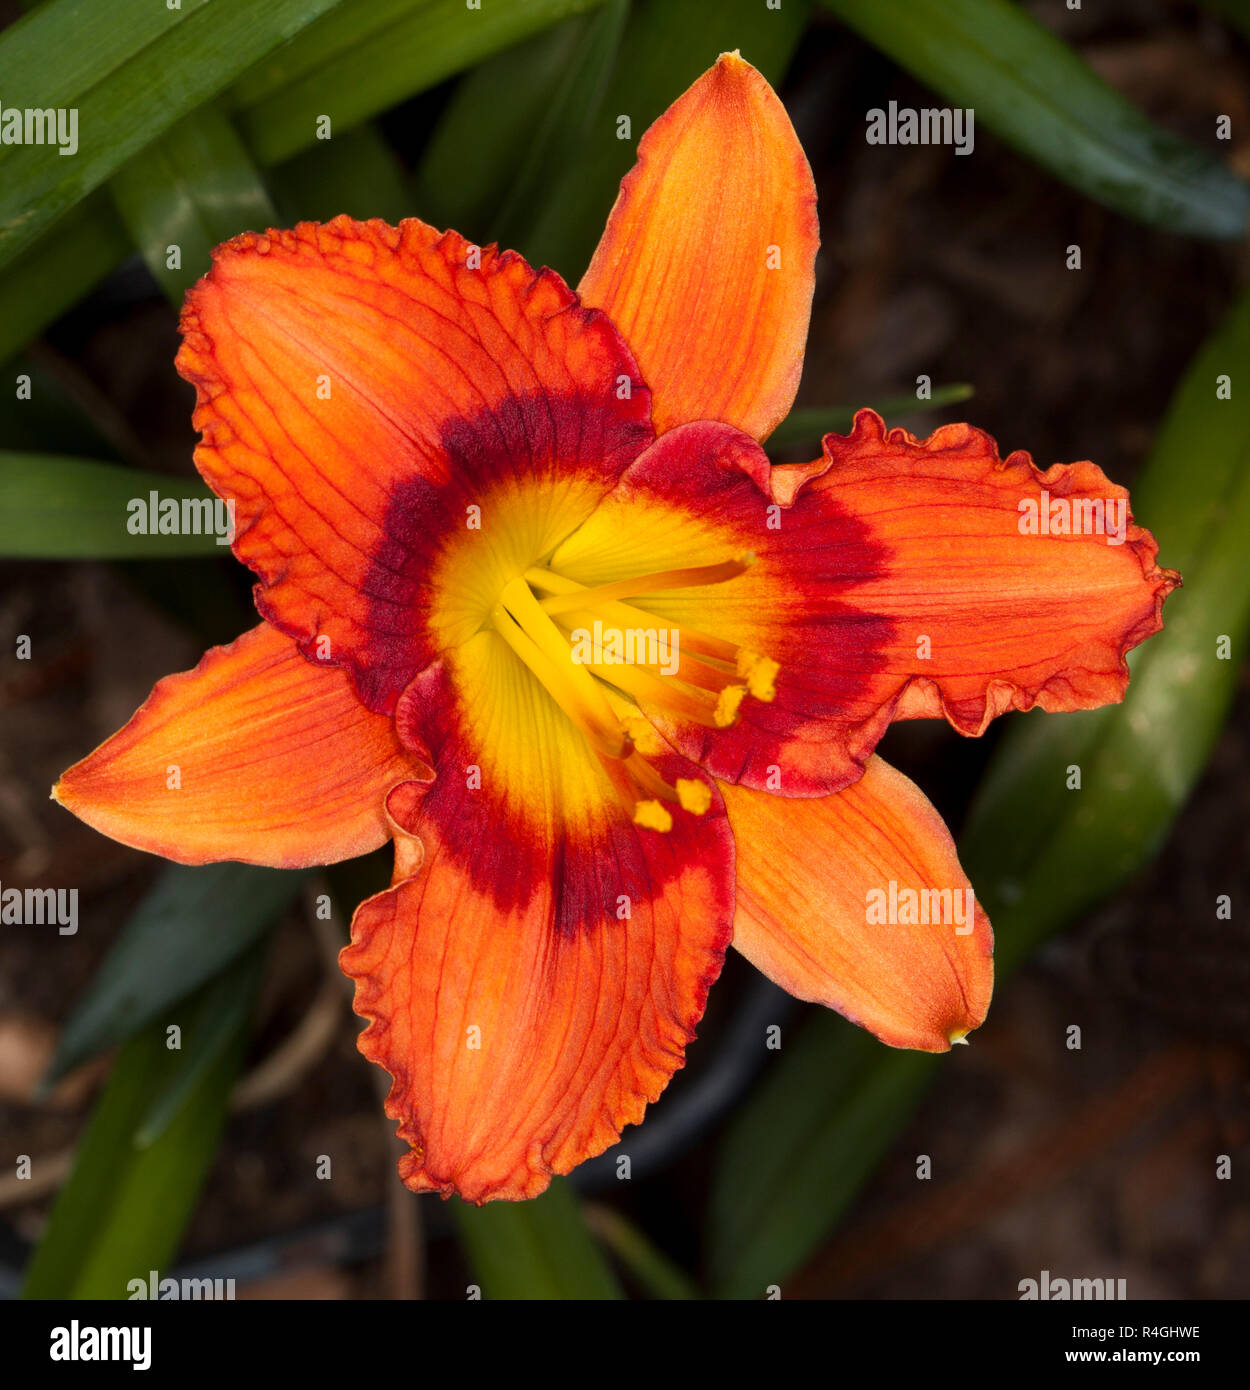 Spectacular vivid orange daylily flower, Hemerocallis, with ring of deep red around yellow throat, against background of dark green leaves Stock Photo